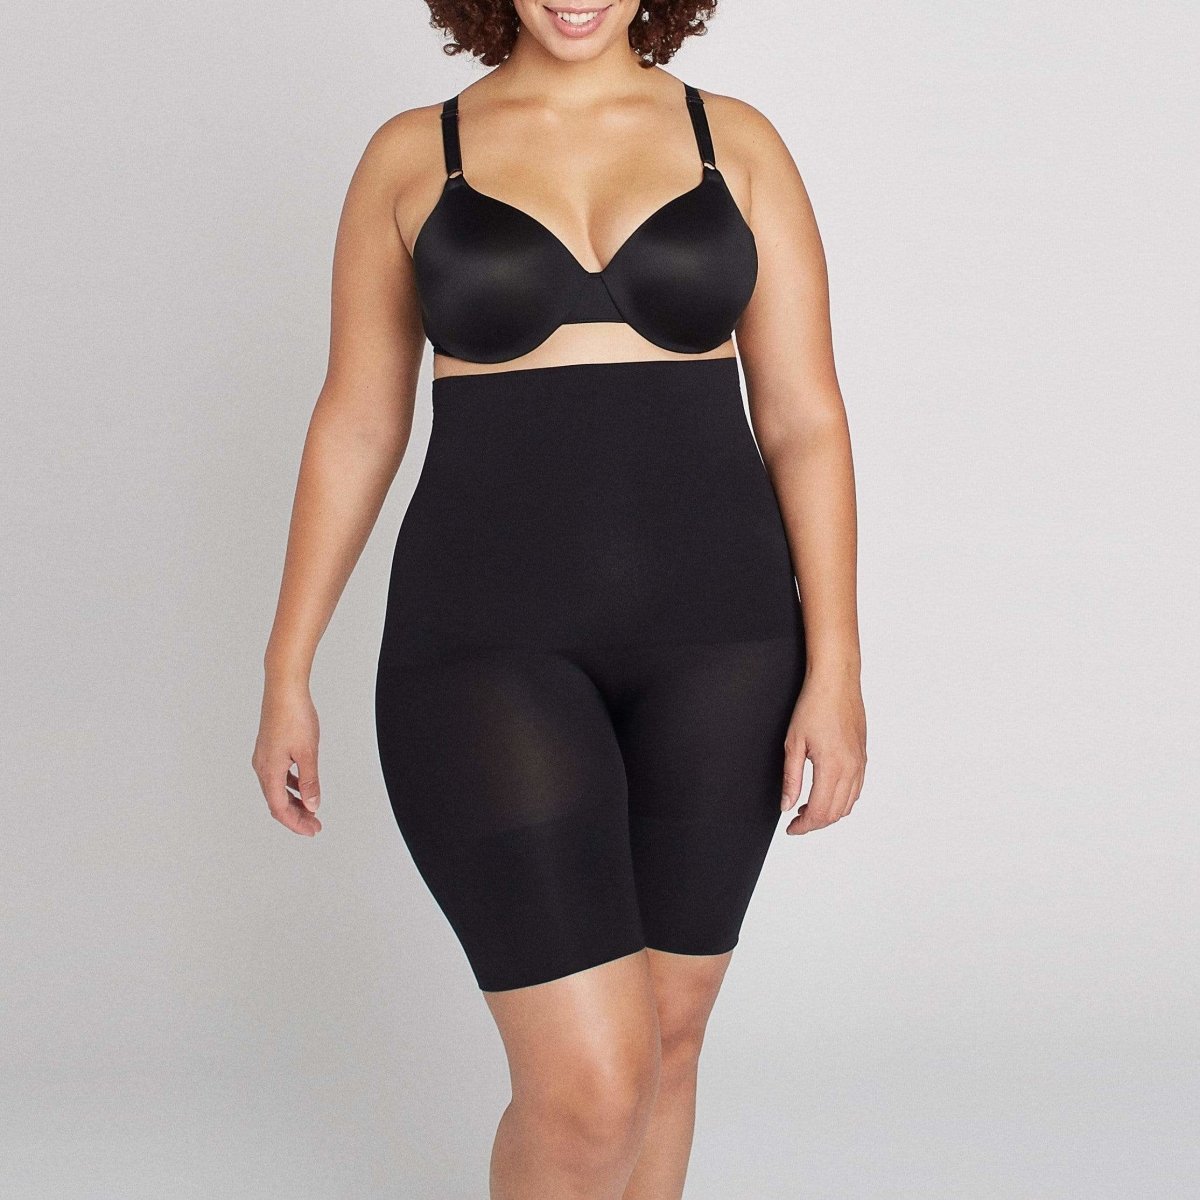  Customer reviews: Underoutfit Shapewear for Women Tummy  Control- High Waisted Shorts- Body Shaper for Women- Small to Plus Sizes